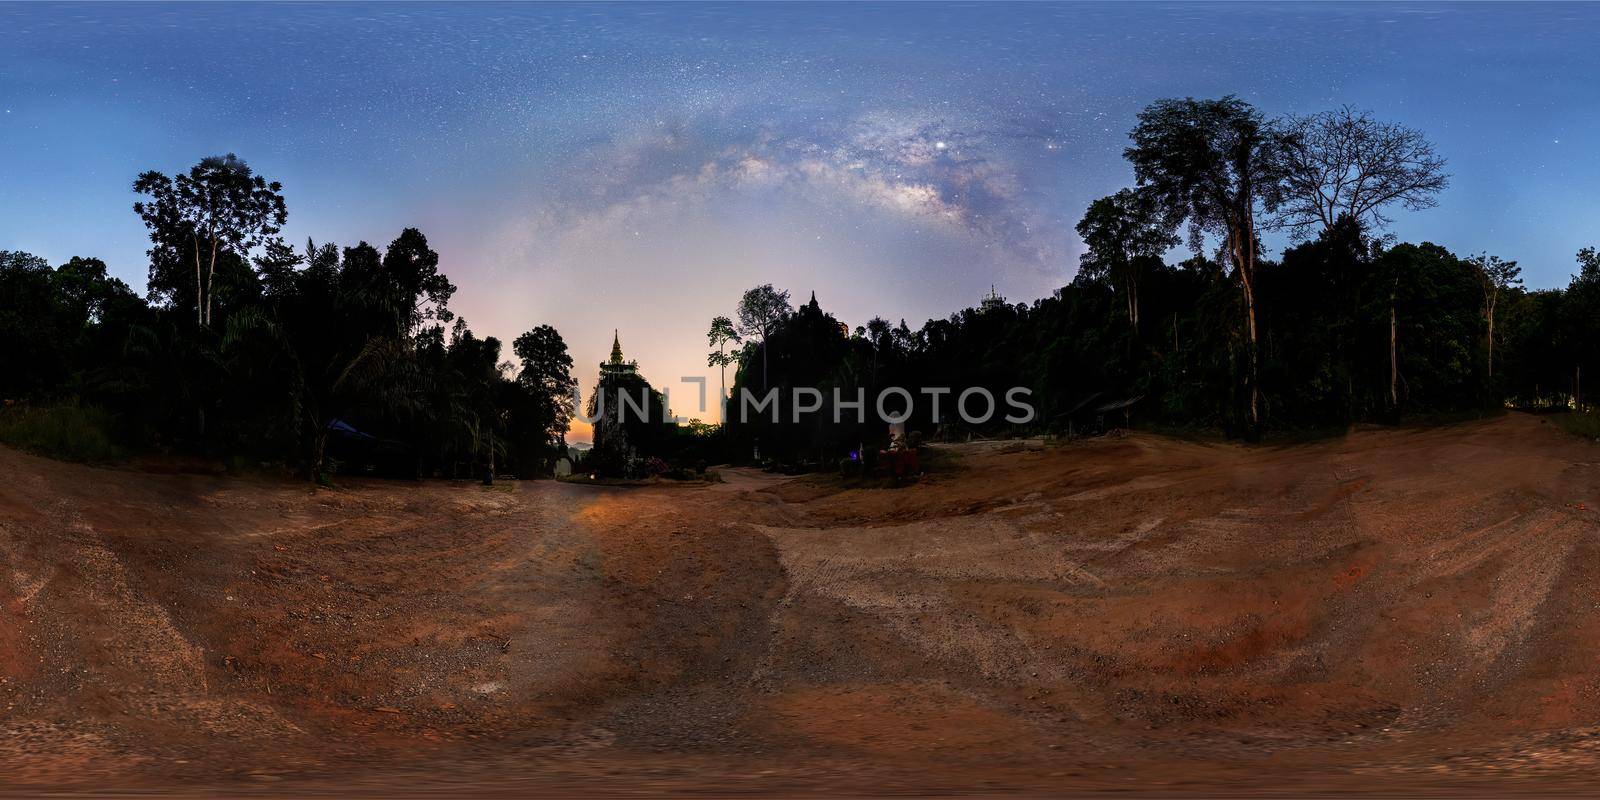 Panorama VR360, the Milky Way above the tree shadow during the Twilight Before sunrise, pagoda on the hilltop